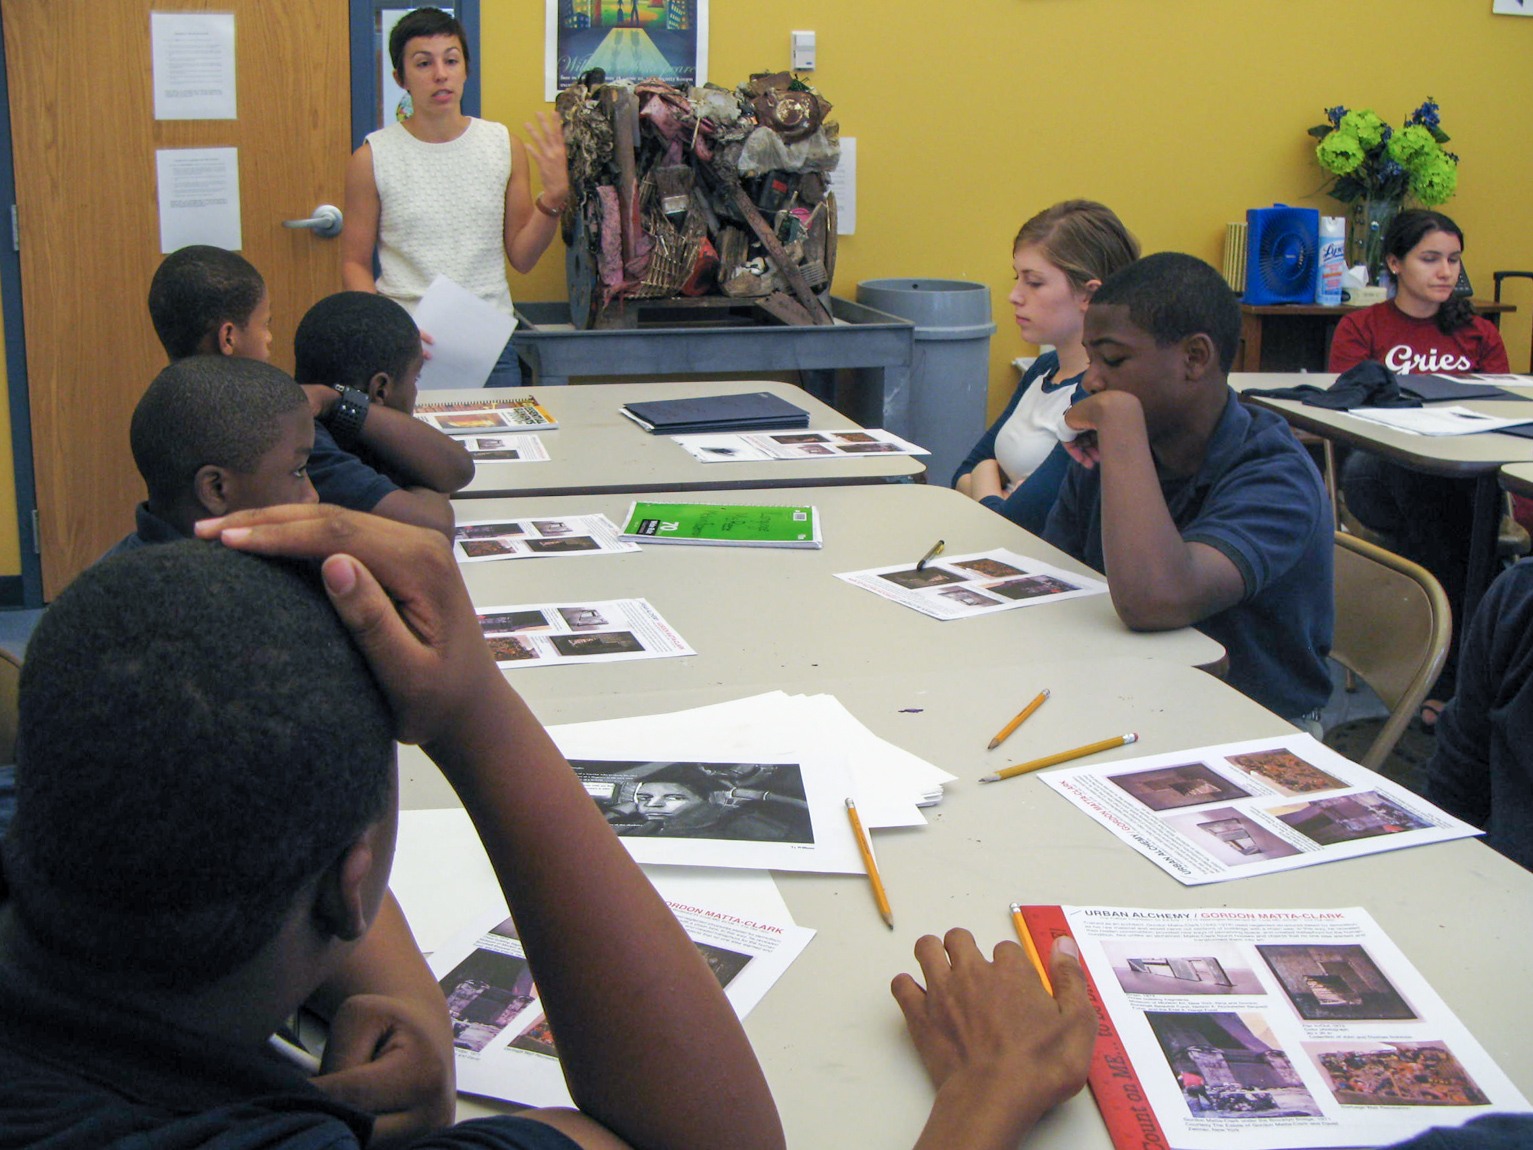 The Assistant Curator of Education discusses with students in a classroom.